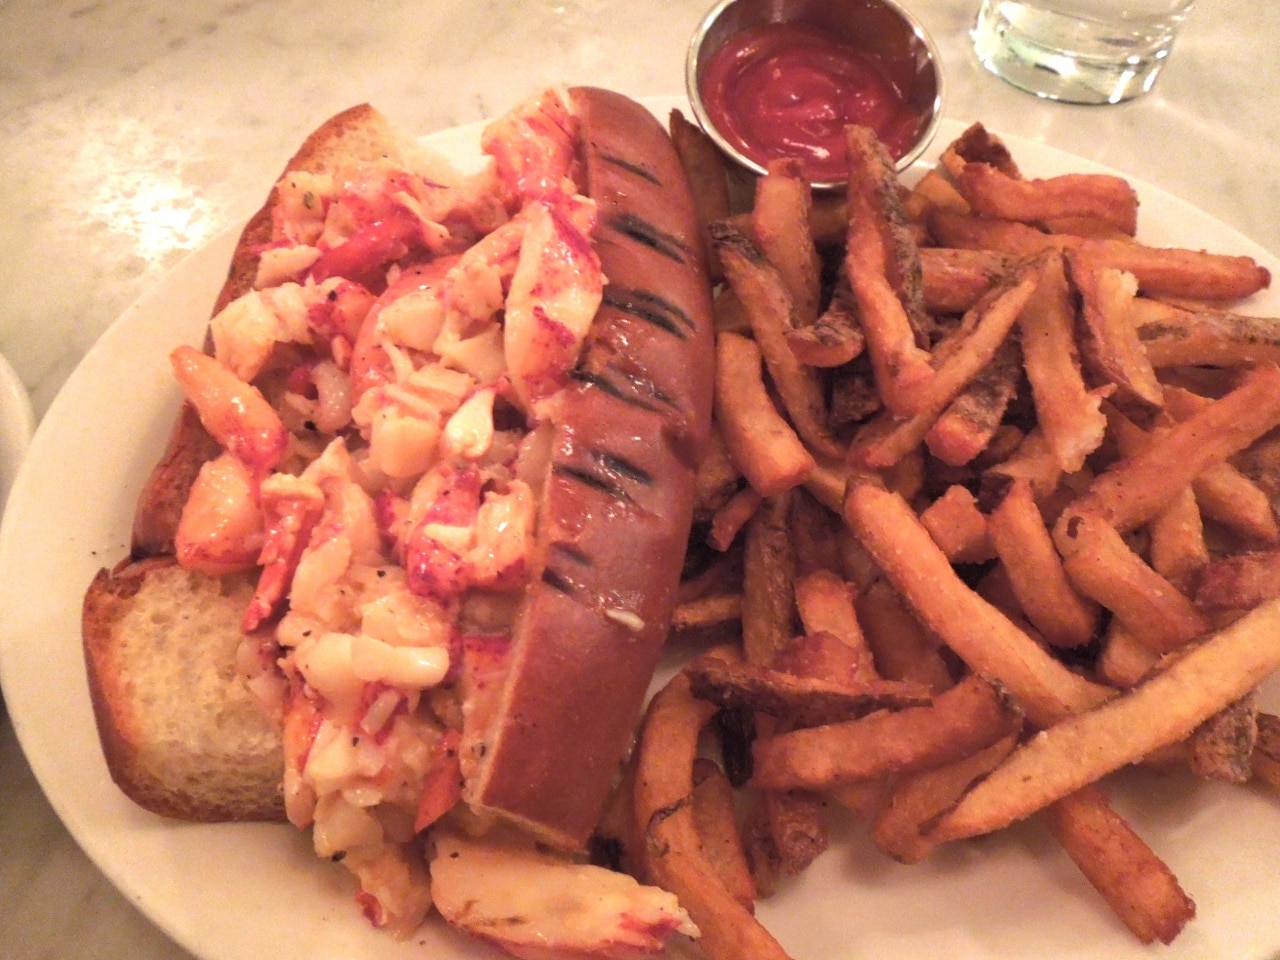 Neptune Oyster Bars warm, buttered lobster roll is often named the best lobster roll in Boston.